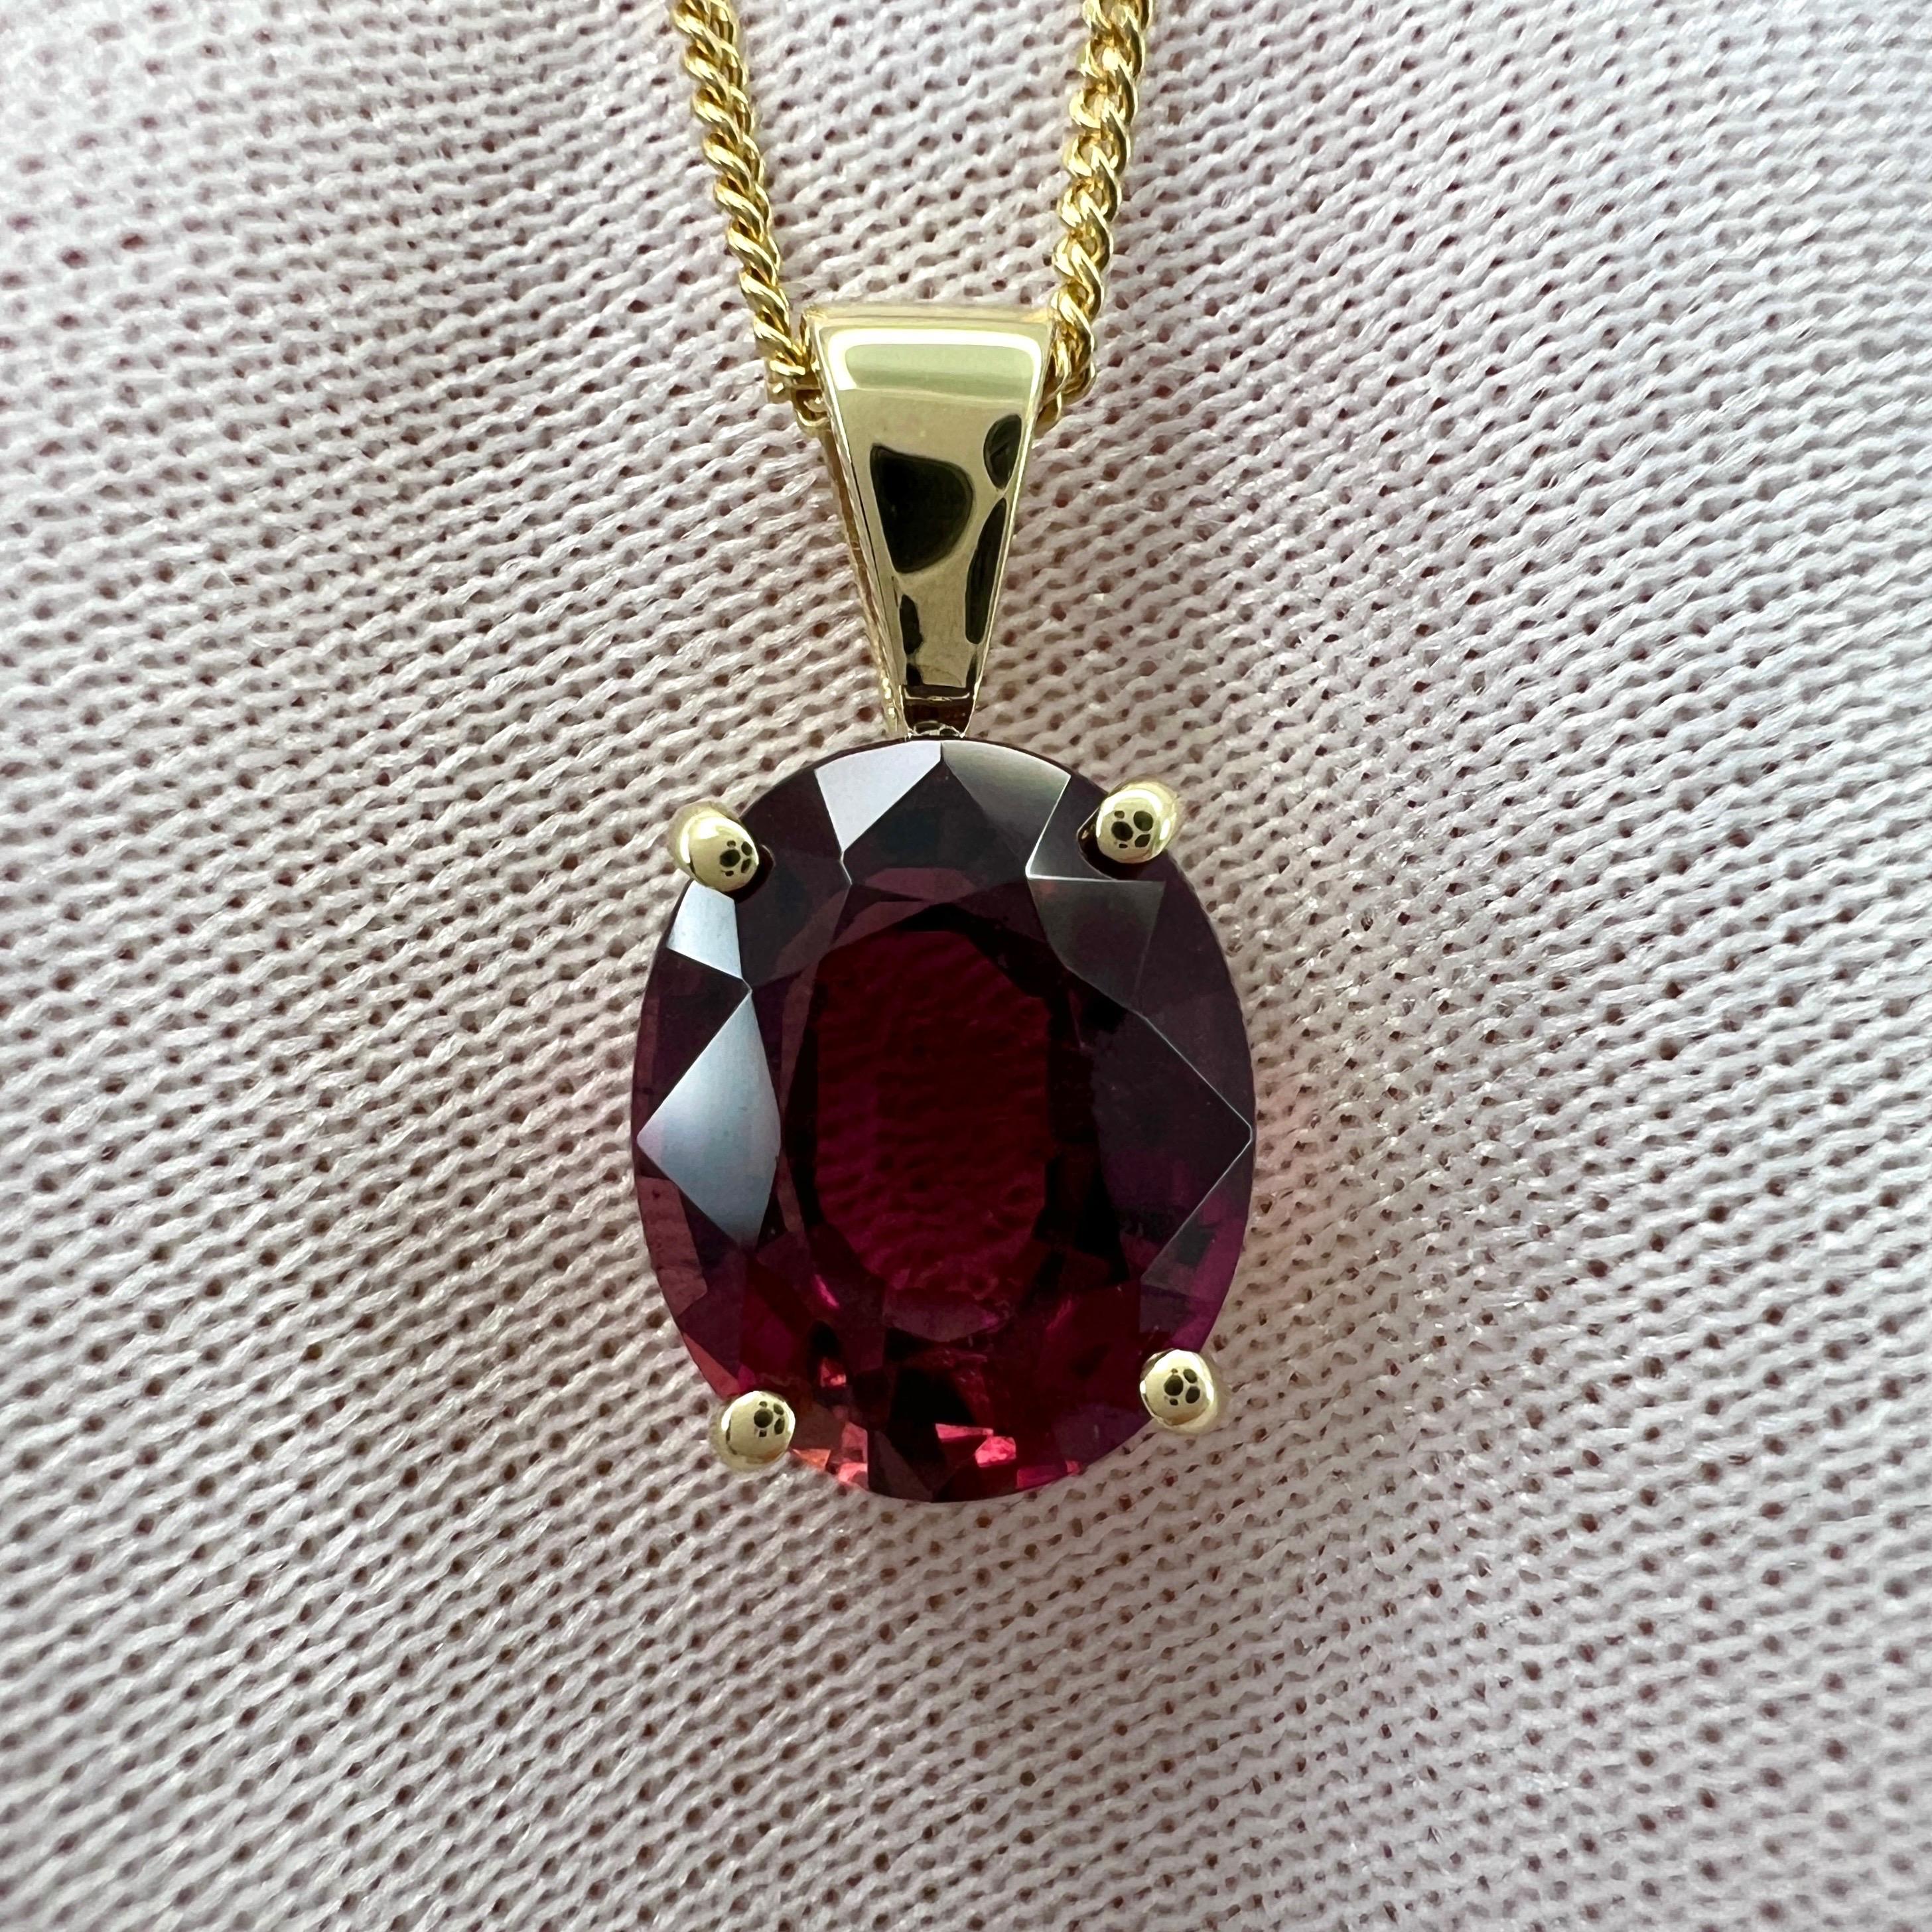 Women's or Men's 2.66ct Rubellite Tourmaline Pink Oval Cut 9k Yellow Gold Pendant Necklace For Sale